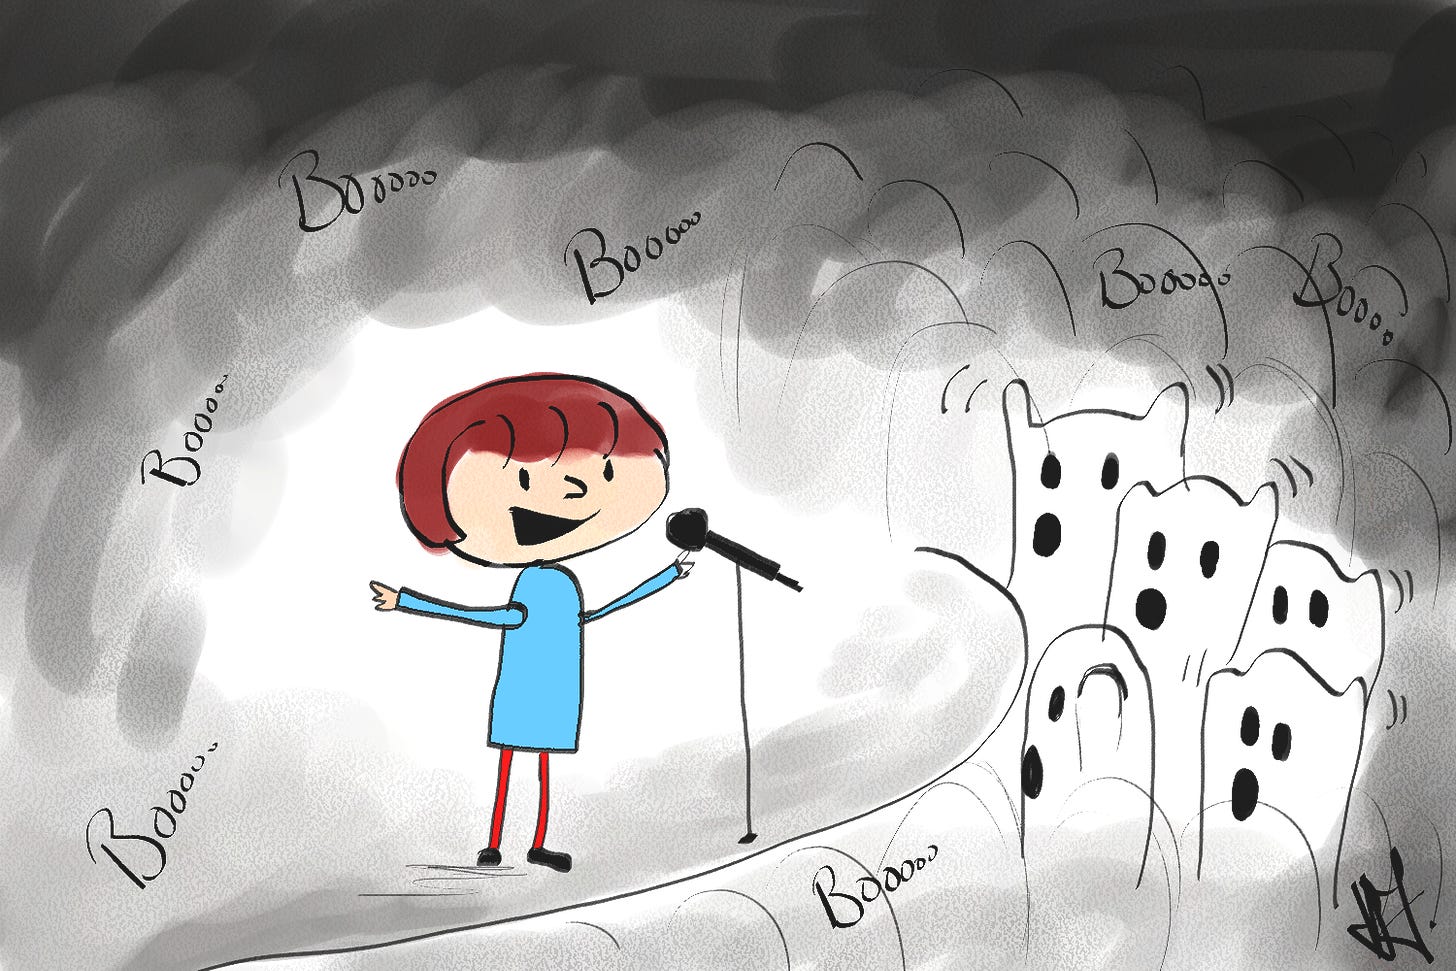 Cartoon by me: small red-haired person in blue outfit stands on stage with a mic. An audience of ghosts boos them.